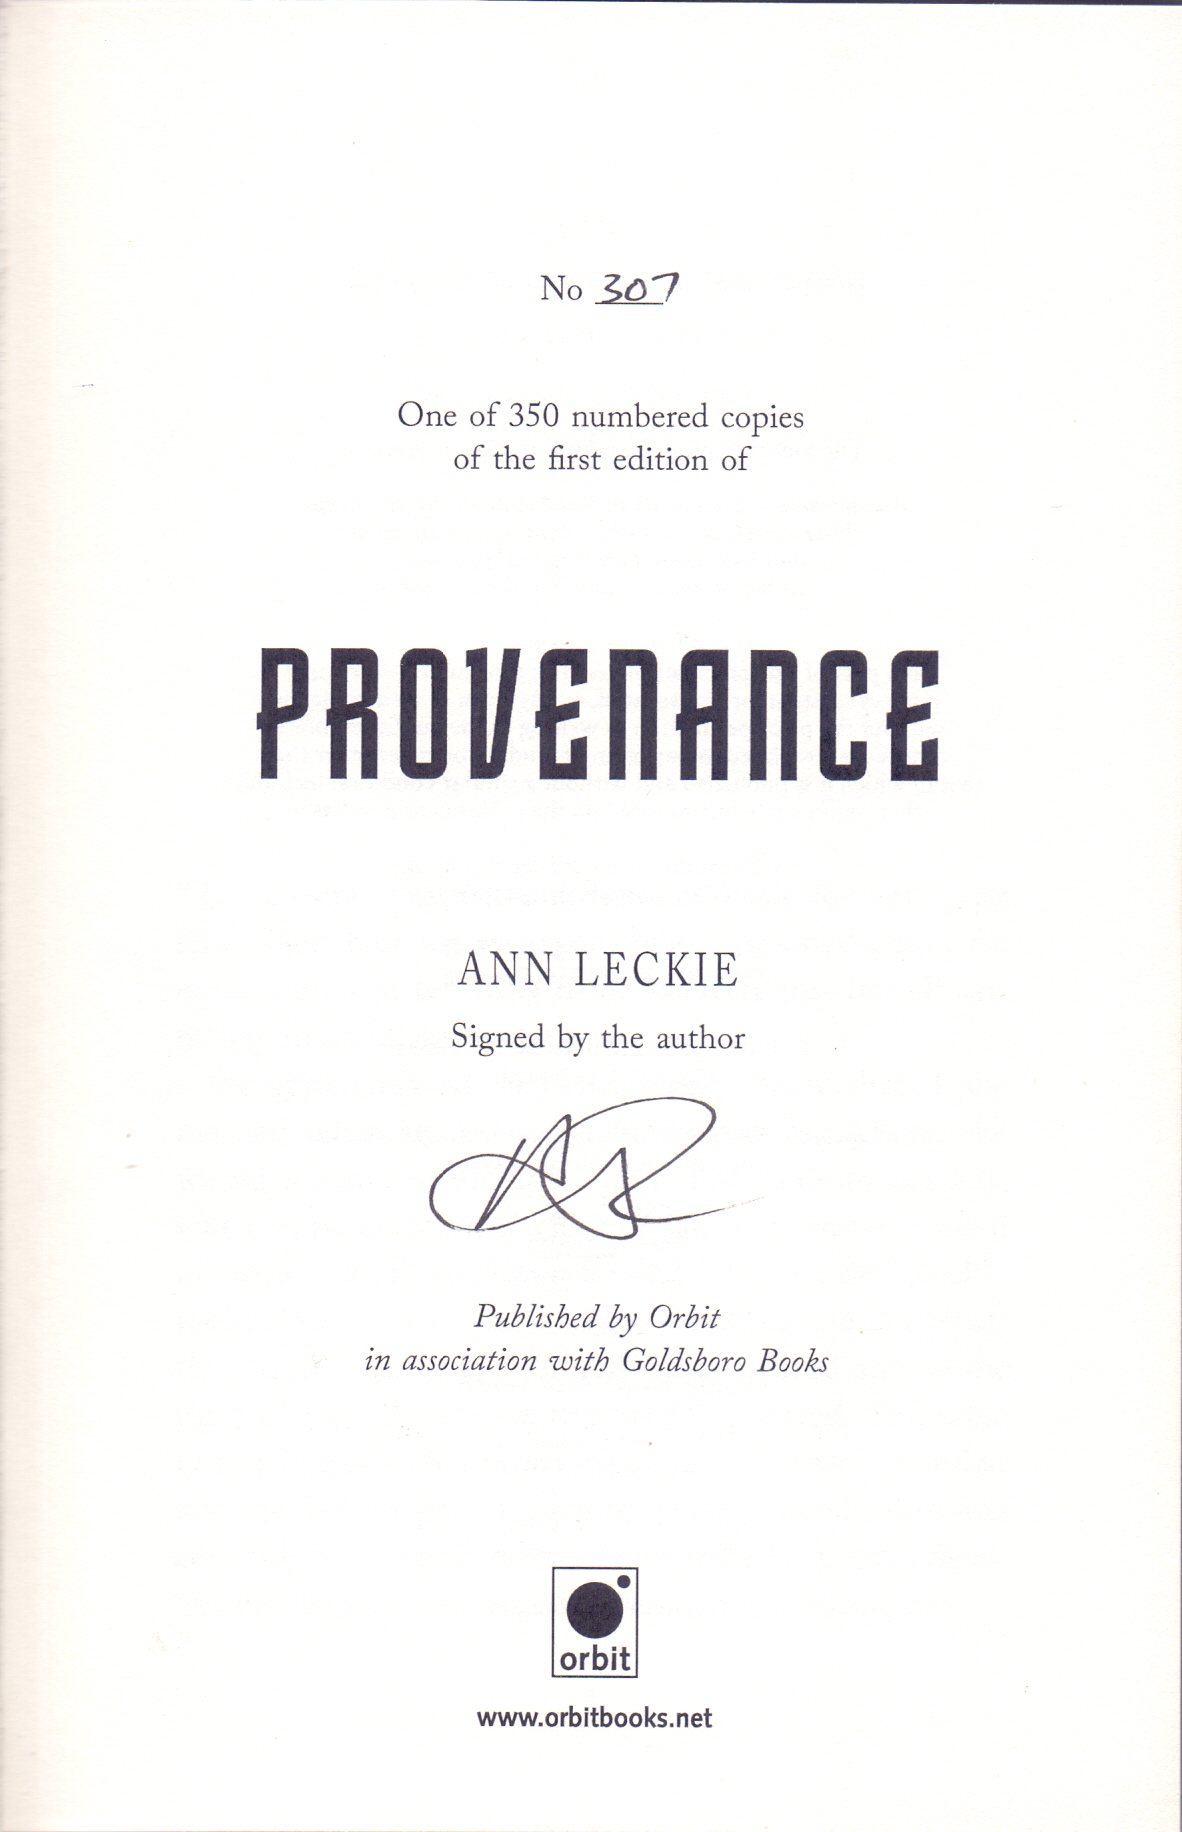 Provenance (SIGNED BOOK) by Ann Leckie